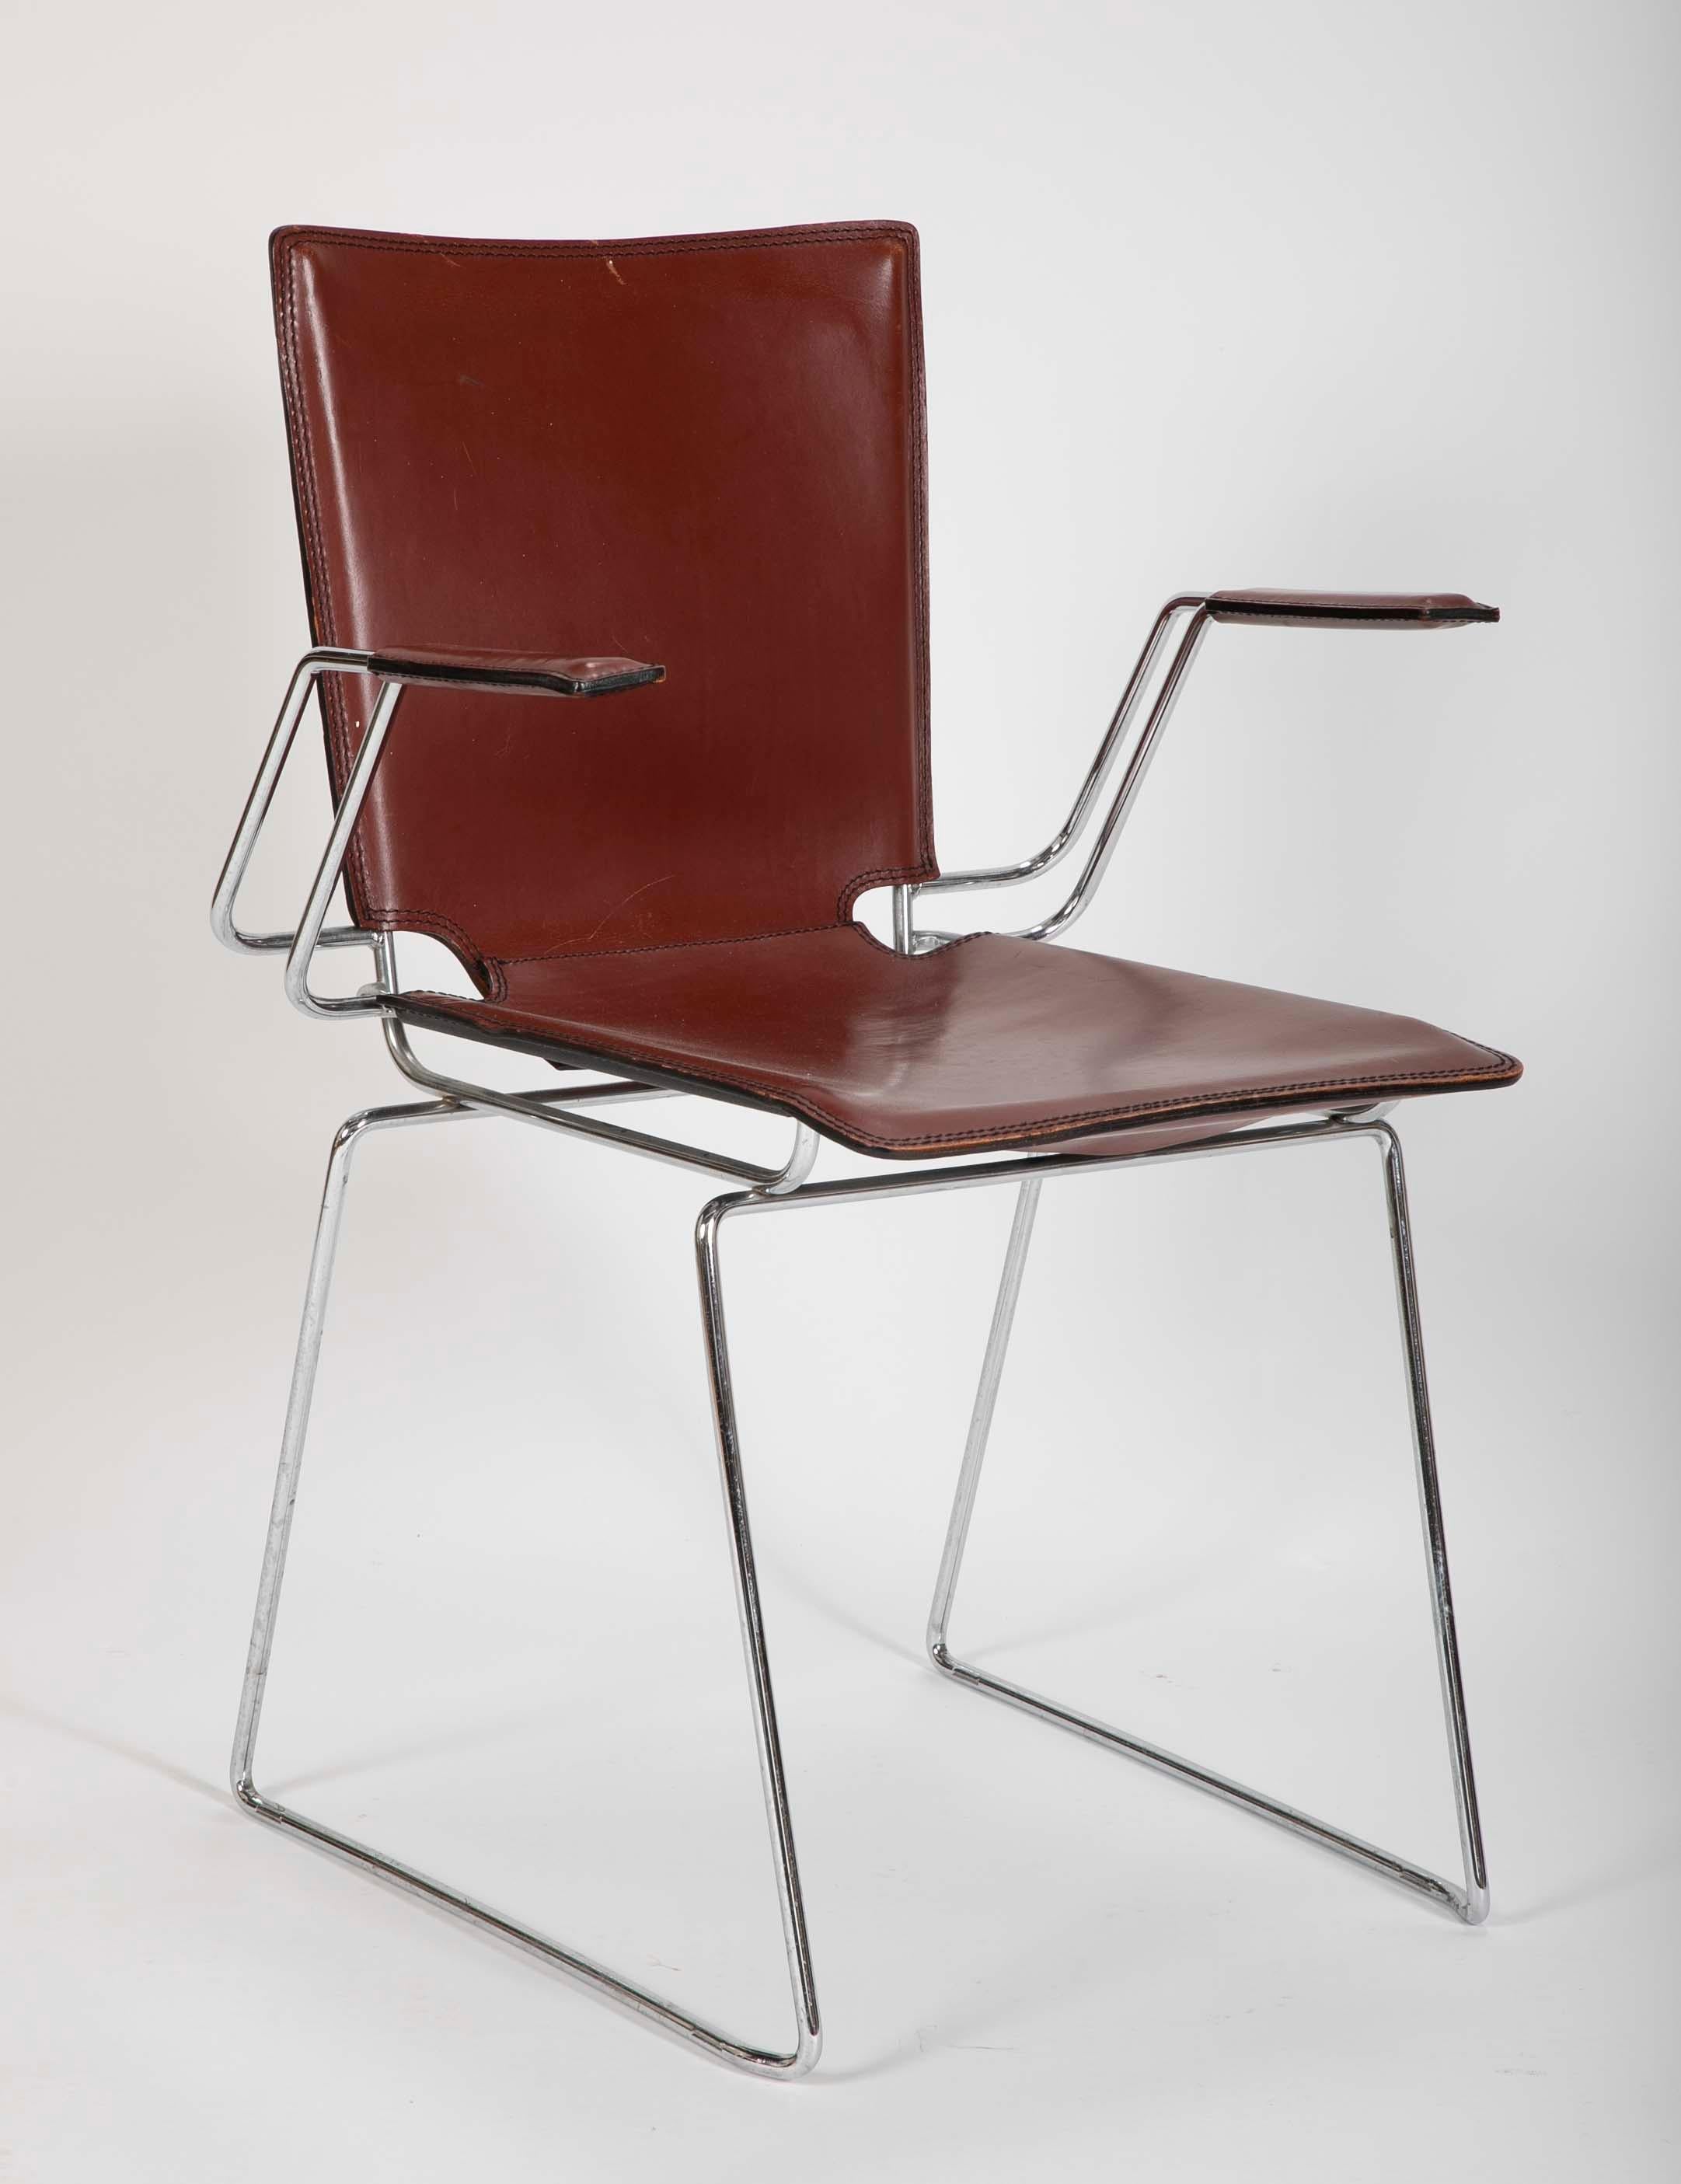 Pair of reddish brown leather and metal frame chairs. 20th Century. Most likely Italian.